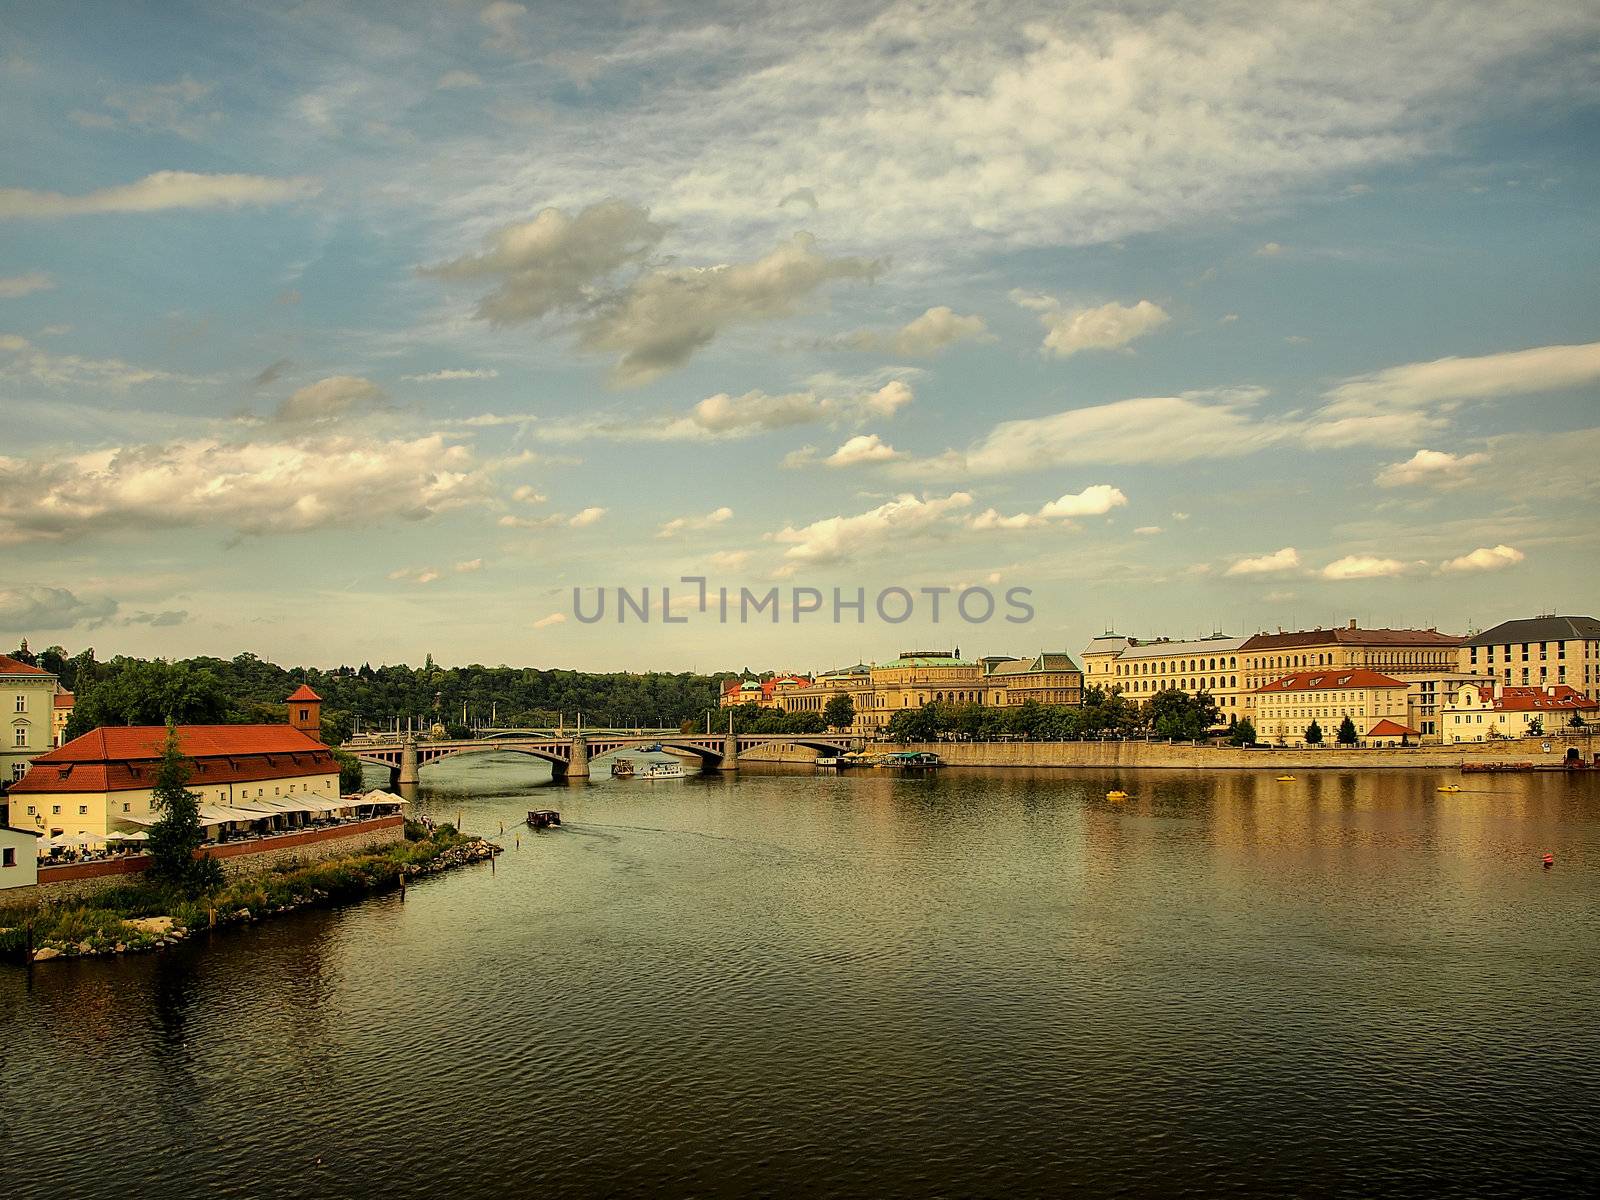 View from Charles Bridge to the wonderful architecture of Prague.